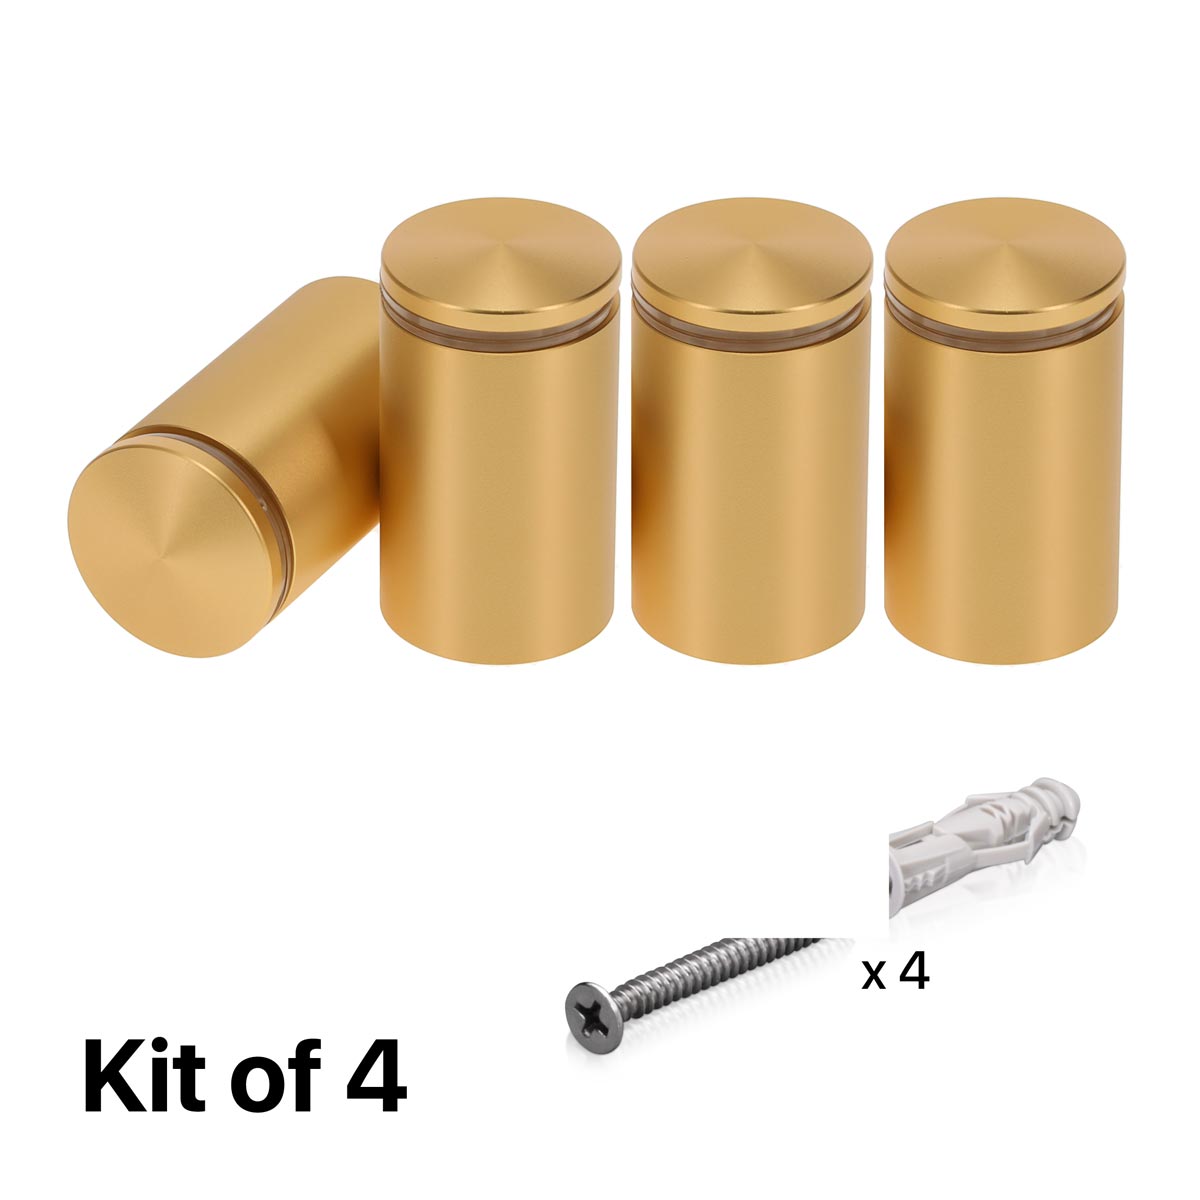 (Set of 4) 1-1/4'' Diameter X 1-3/4'' Barrel Length, Alumi. Rounded Head Standoffs, Matte Champagne Anodized Finish Standoff with (4) 2216Z Screws and (4) LANC1 Anchors for concrete or drywall (For In / Out use) [Required Material Hole Size: 7/16'']